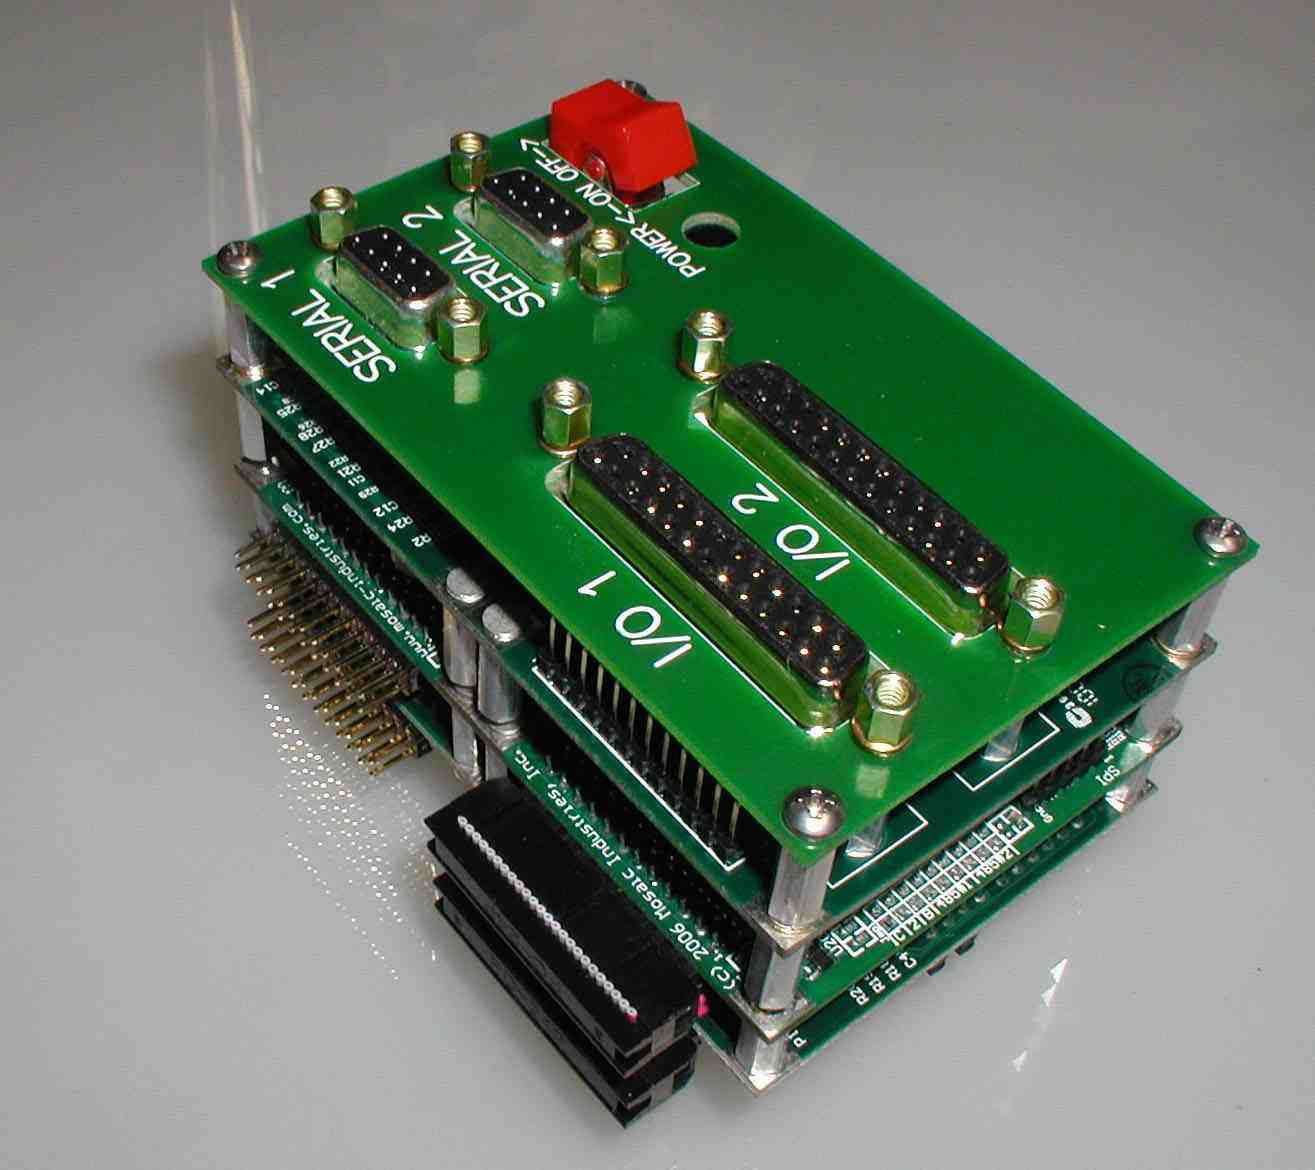 New product design with a switching power supply, I/O boards, and single board computer